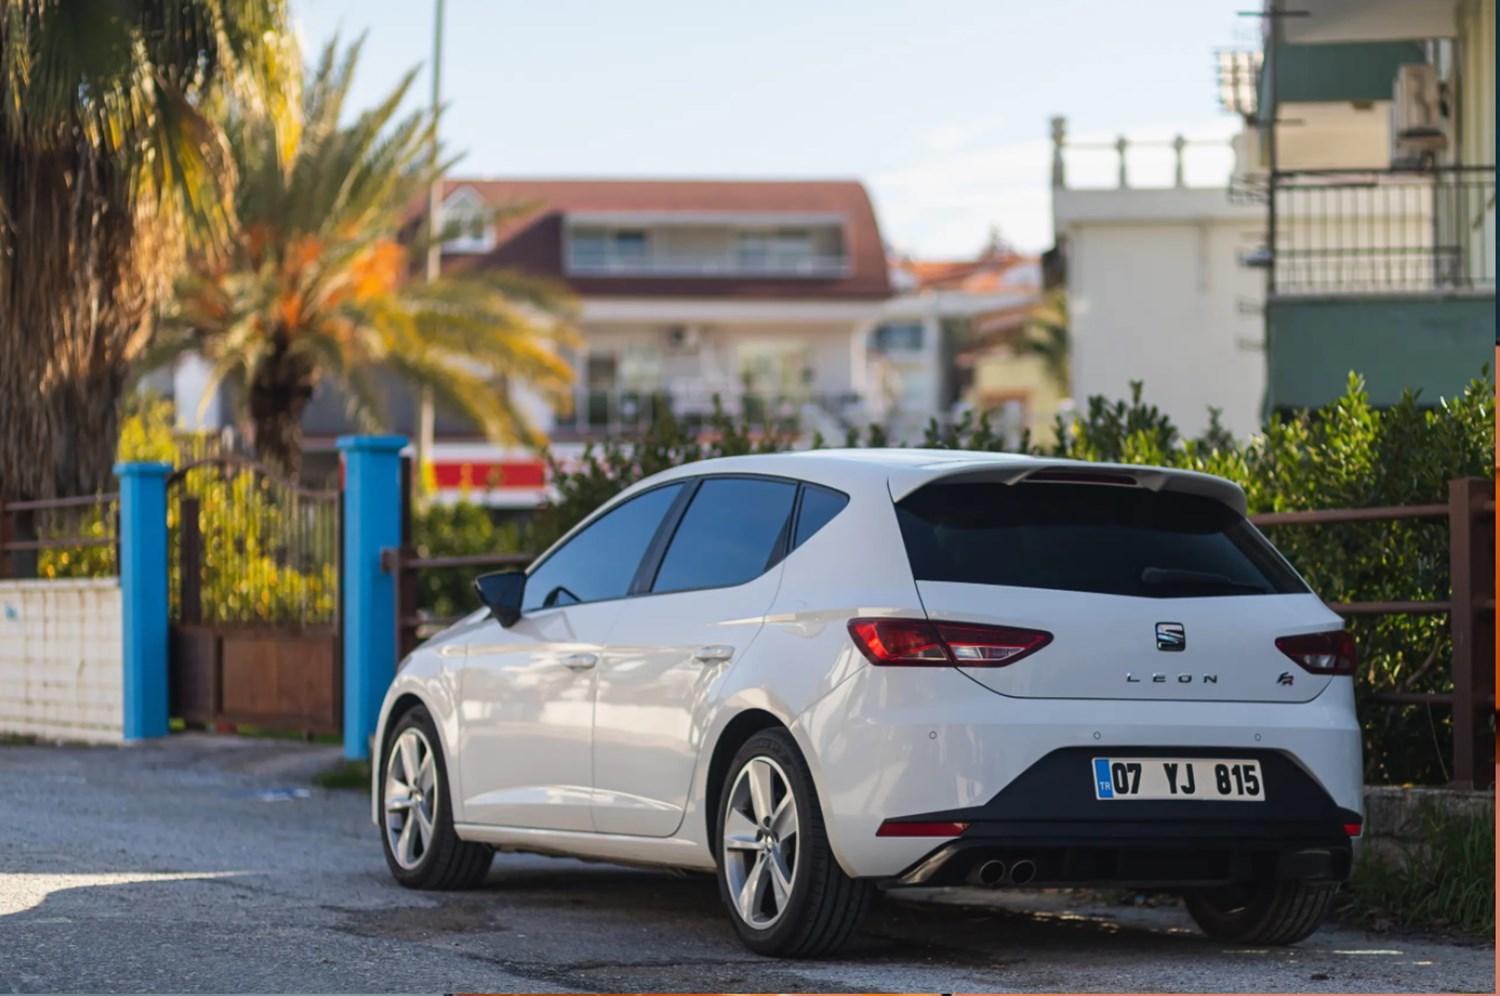 Best Budget Family Hatchback Seat Leon Mk2 Tdi 2.0 Review And